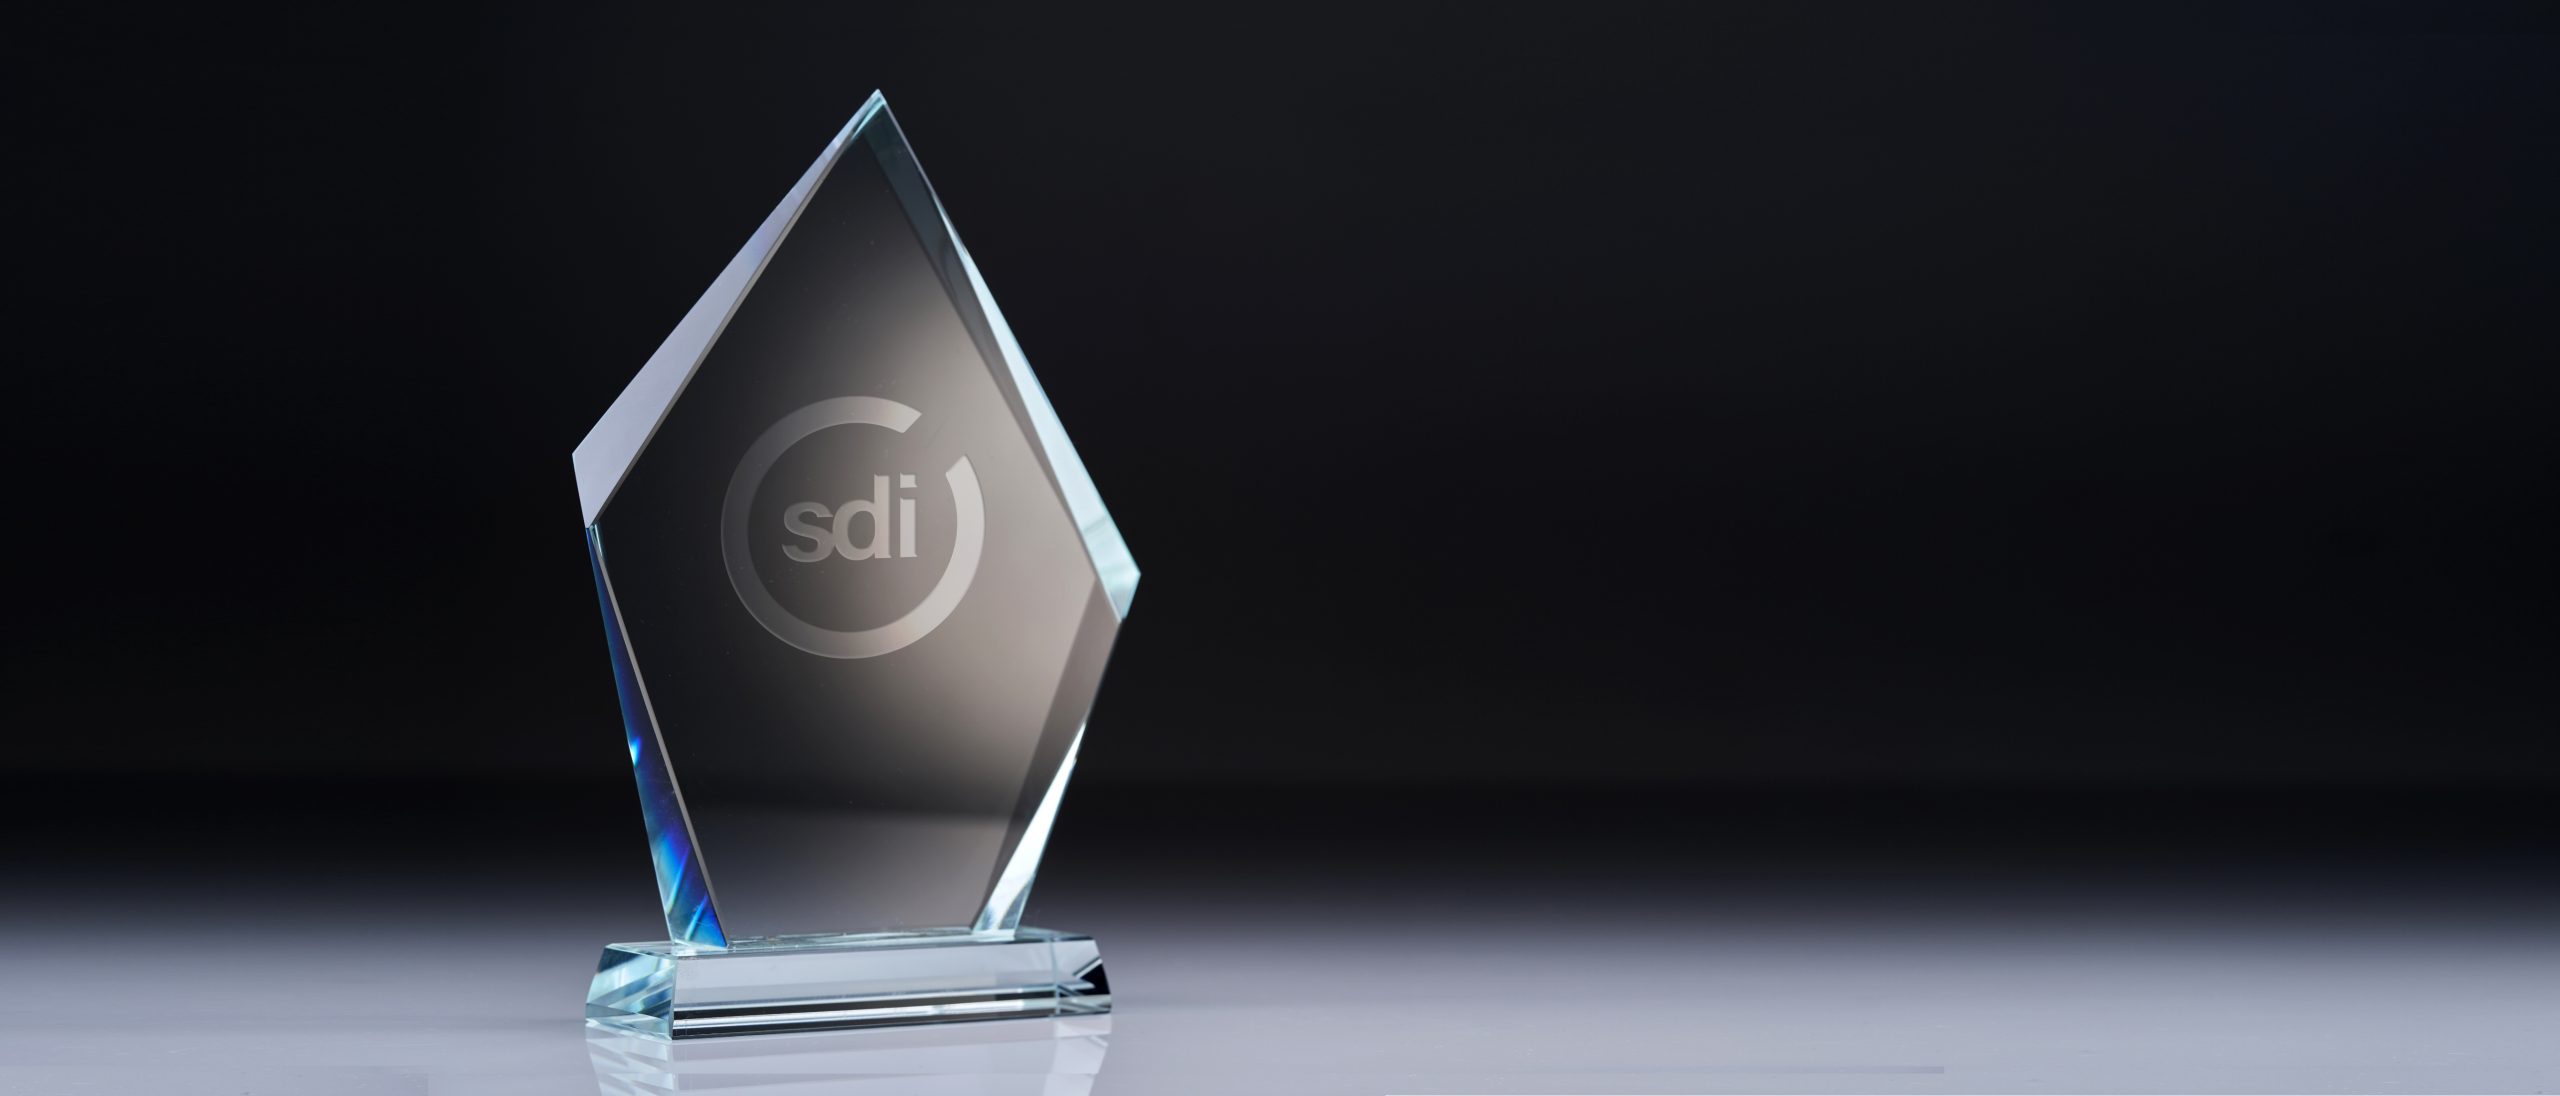 An award with an SDI logo on a black background - training and talent development